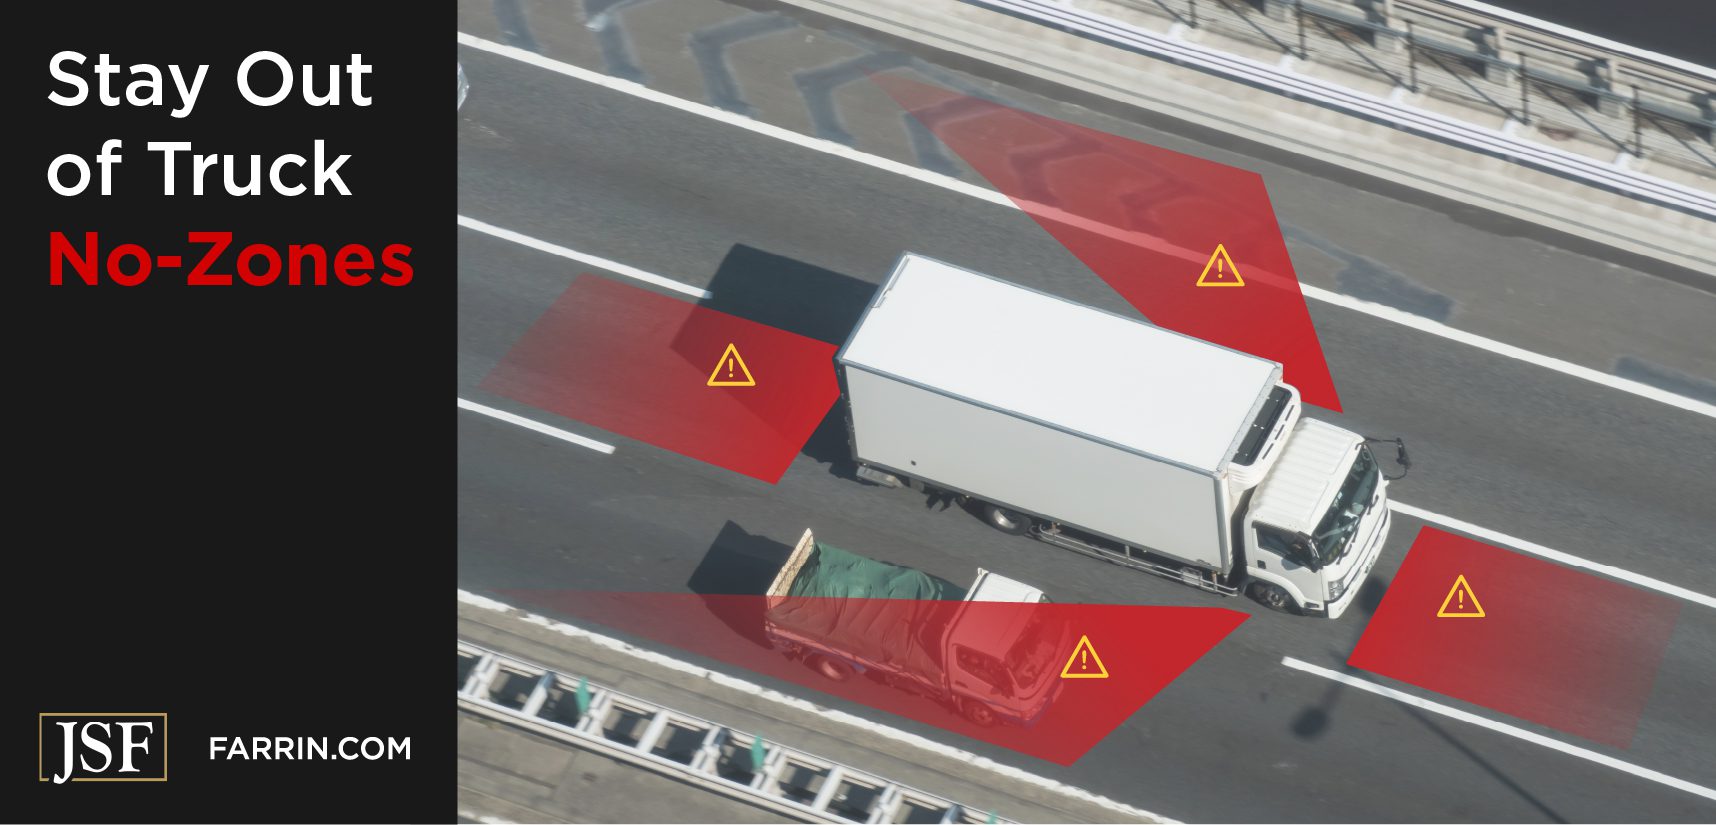 Truck "No-Zones" are the four dangerous blind spots in front, behind & on either side of the truck.